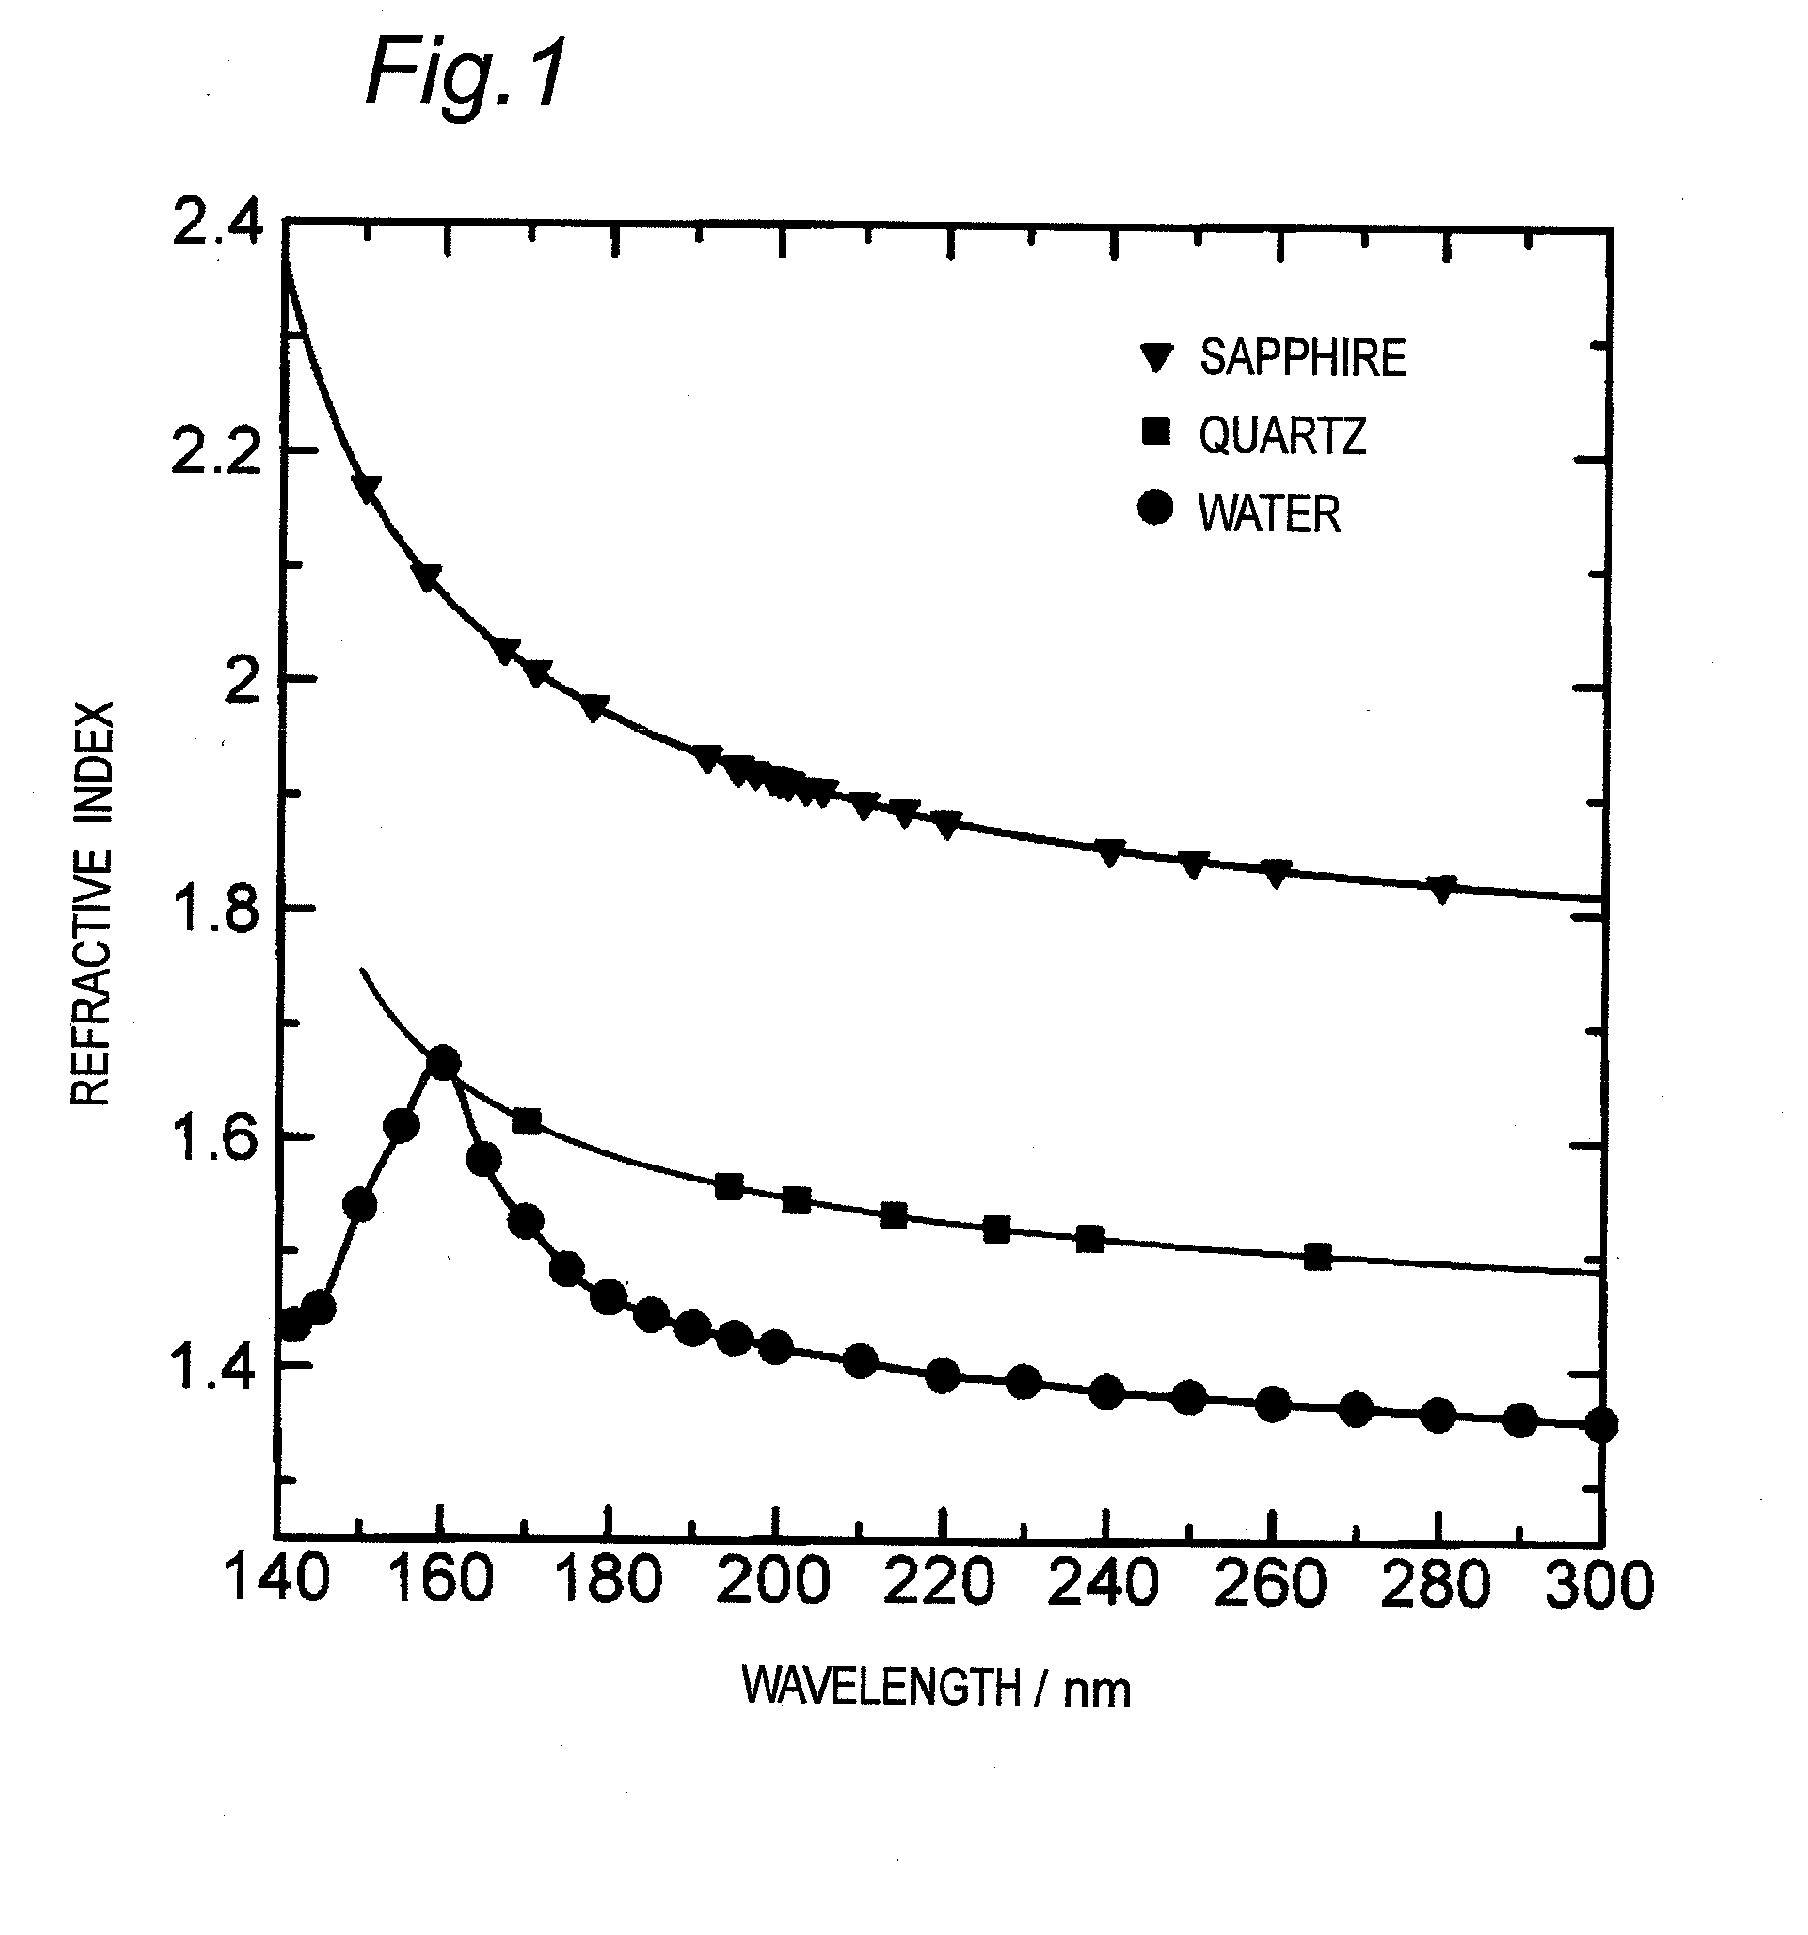 Method for attenuated total reflection far ultraviolet spectroscopy and an apparatus for measuring concentrations therewith